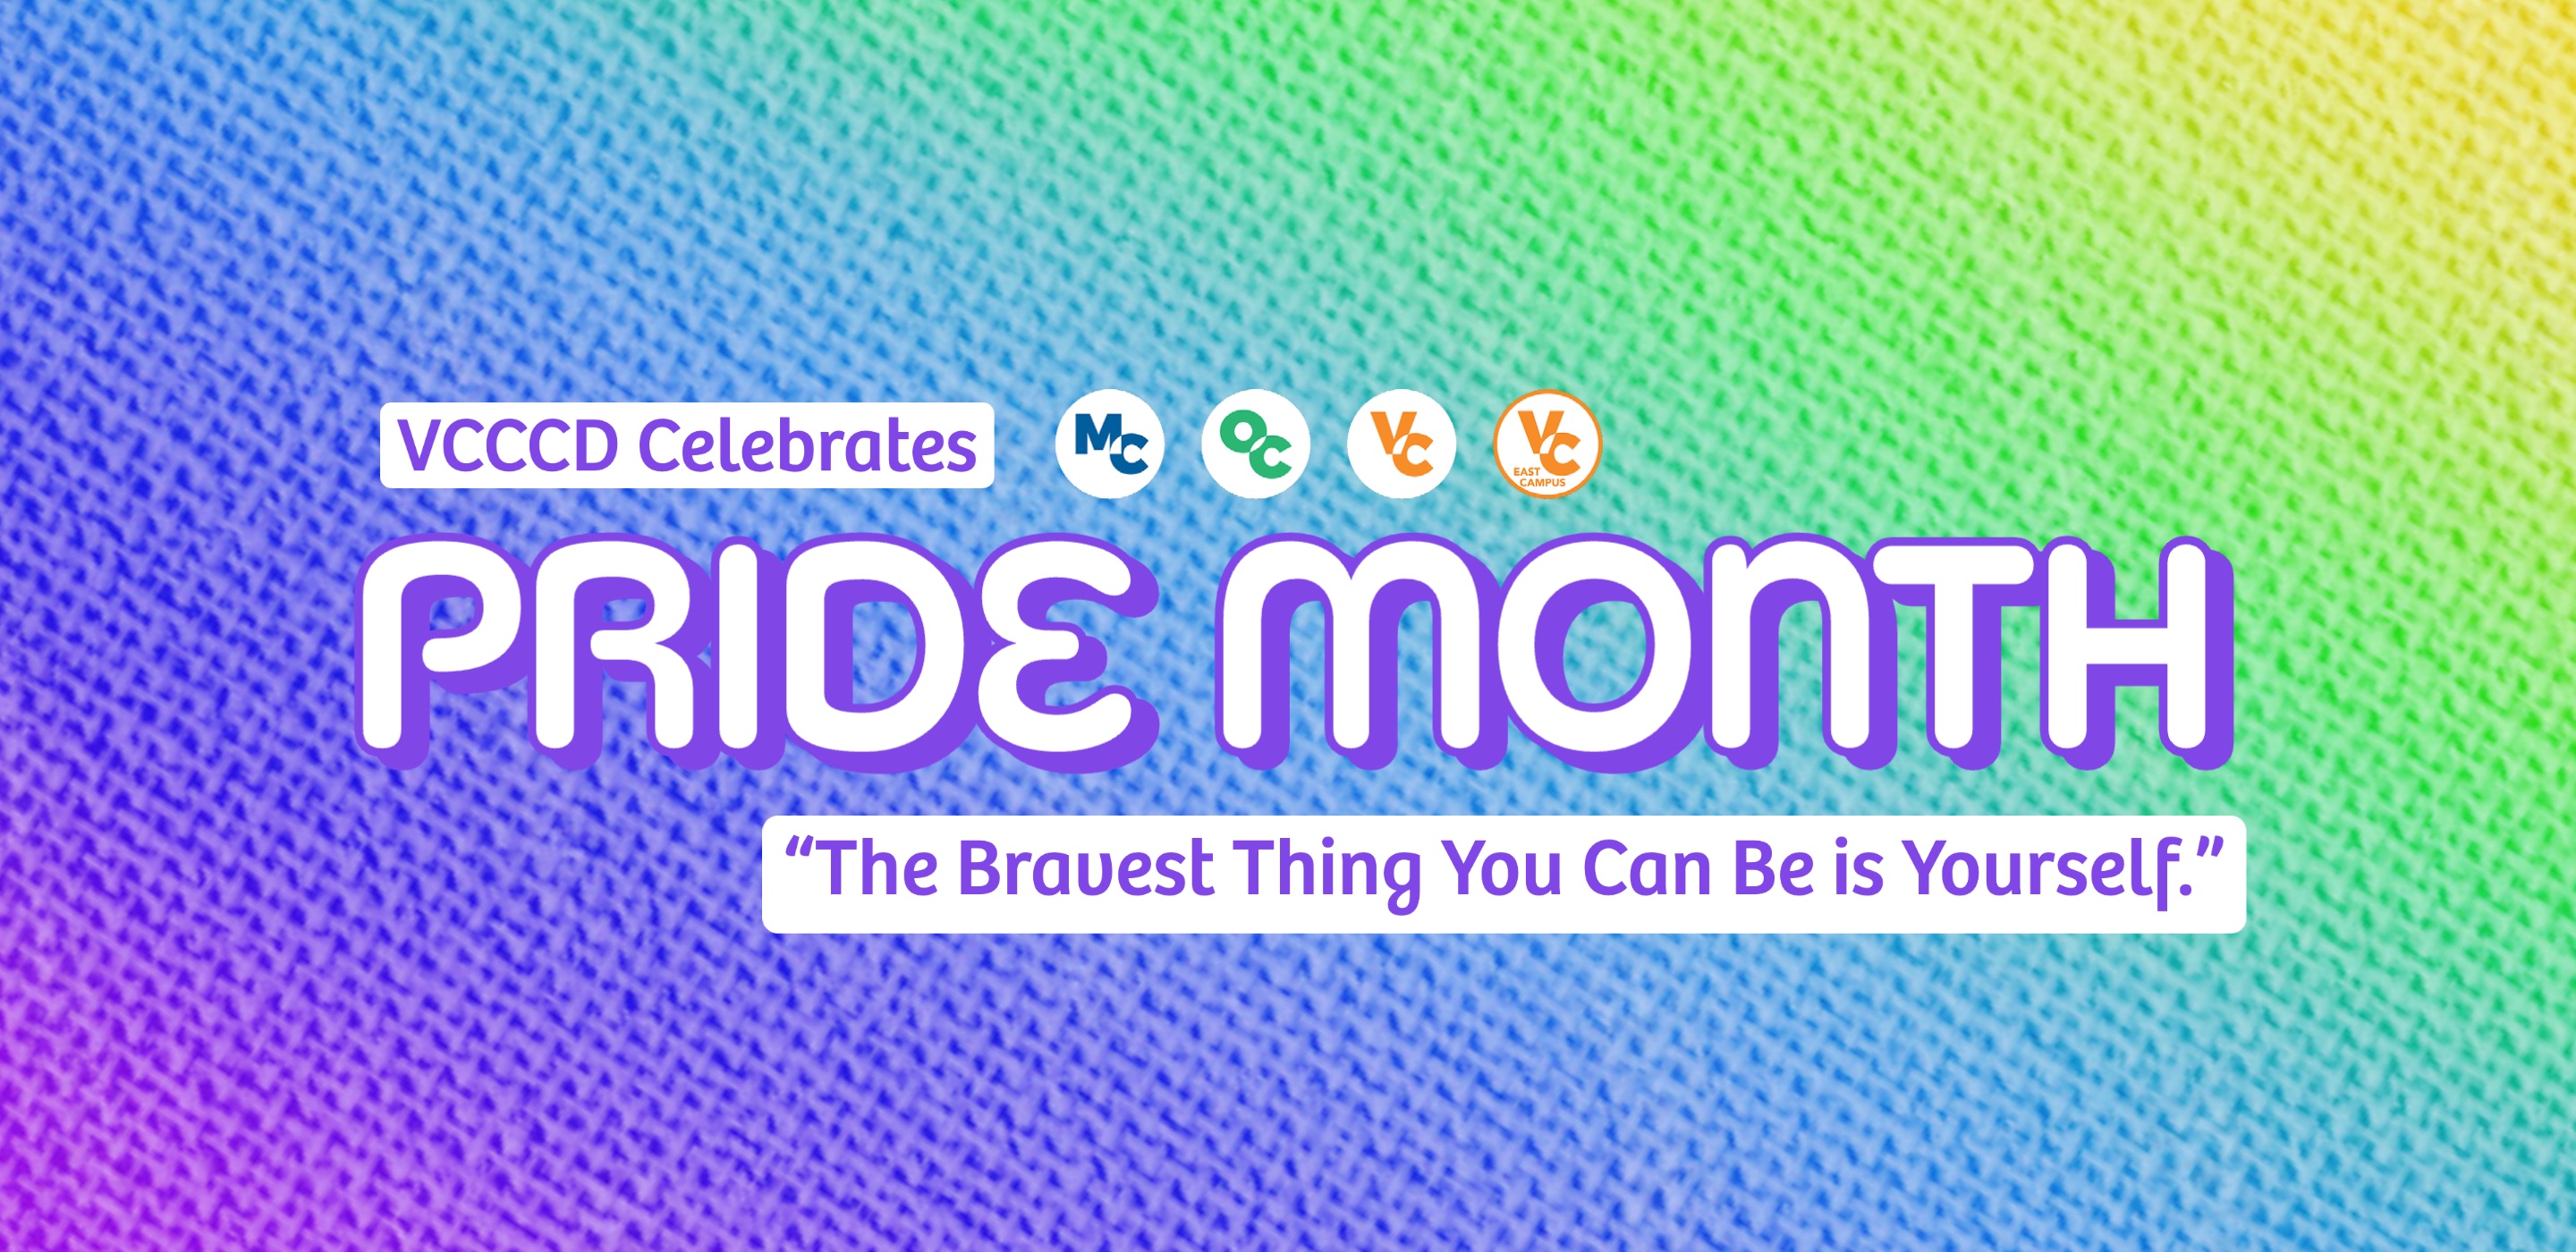 Background of a knit texture in a rainbow ombré with text: VCCCD Celebrates Pride Month "The Bravest Thing You Can Be is Yourself"